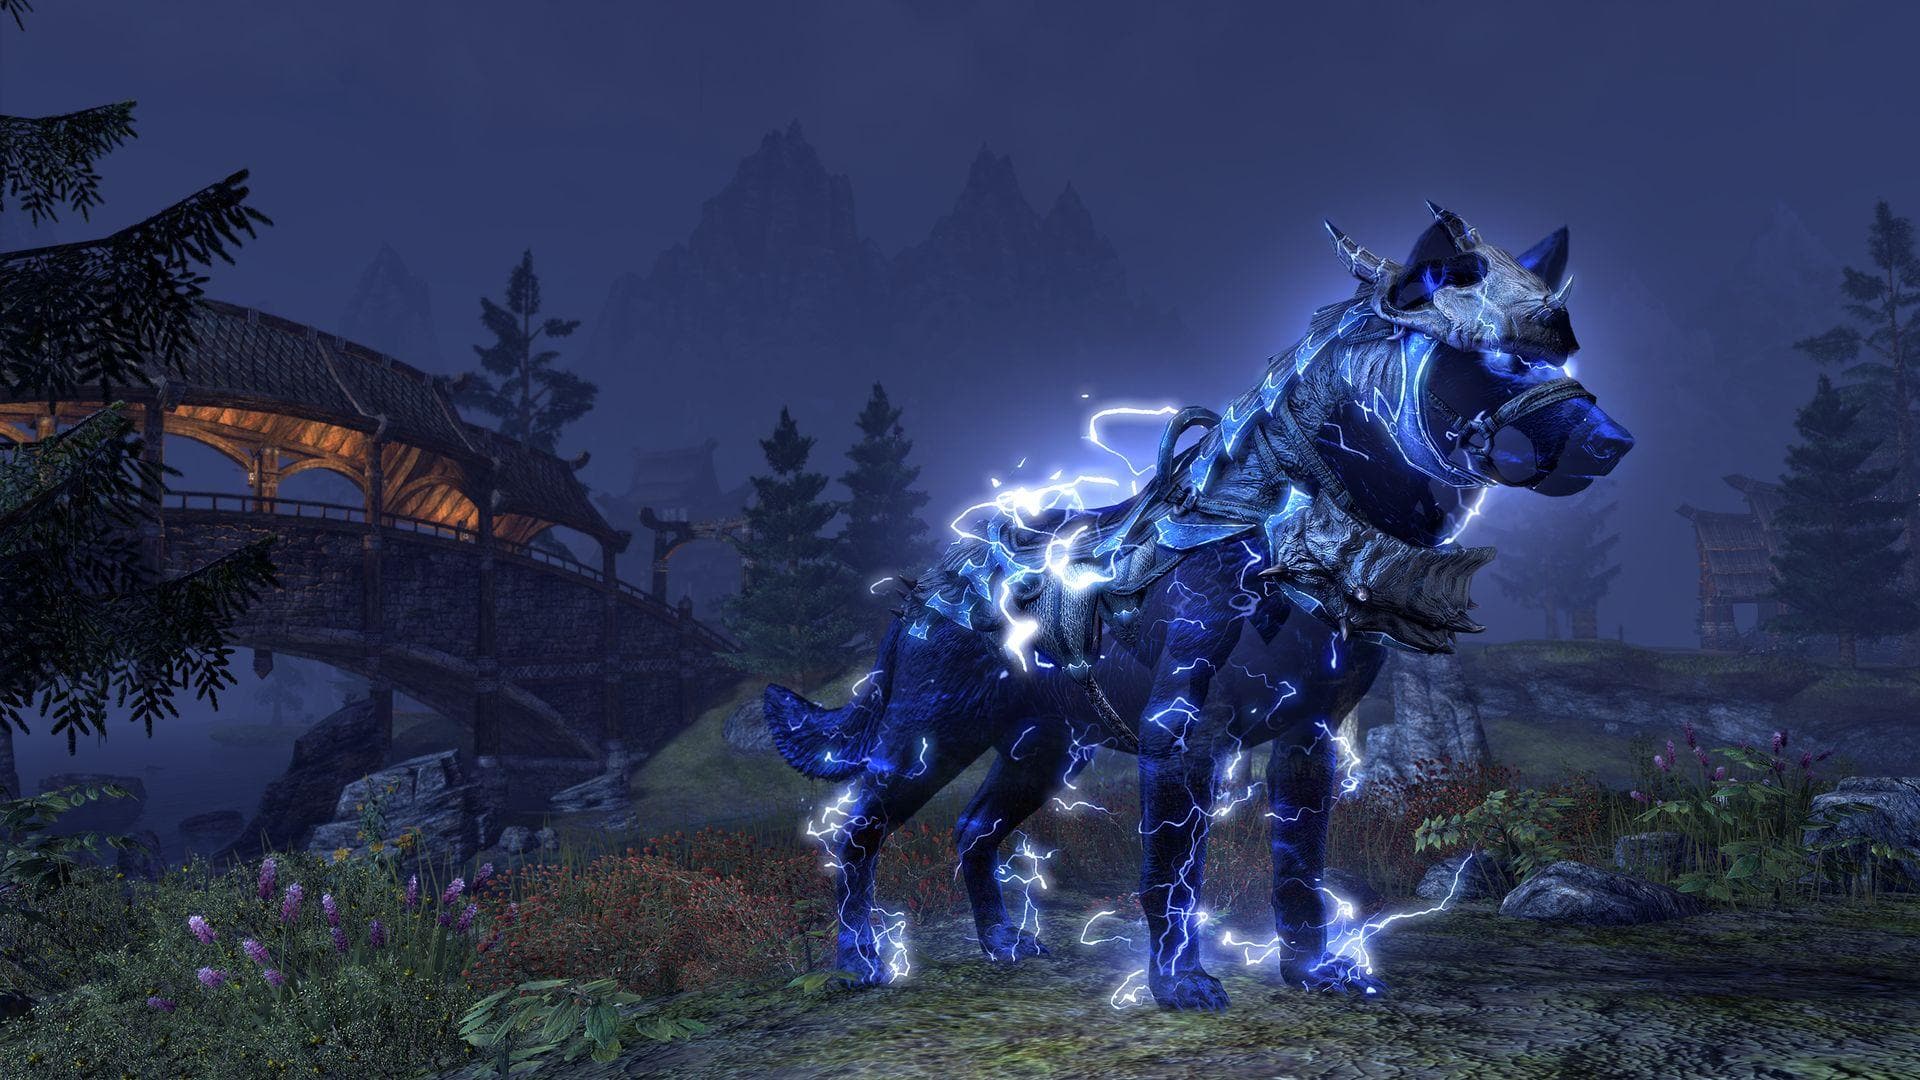 Dragonscale Storm Wolf & Dragonscale Frost Senche Mounts.